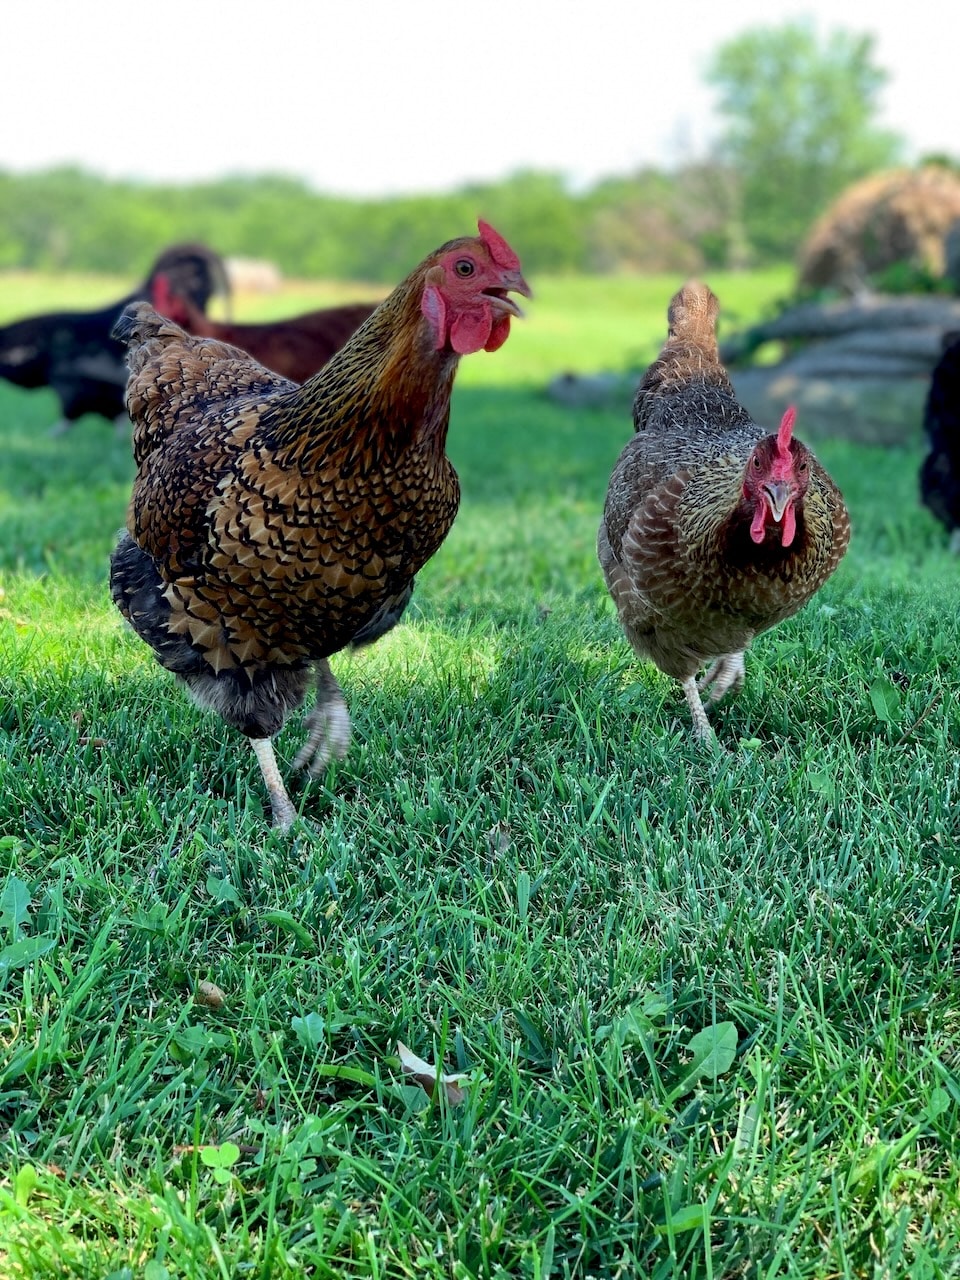 Hens have their own personalities